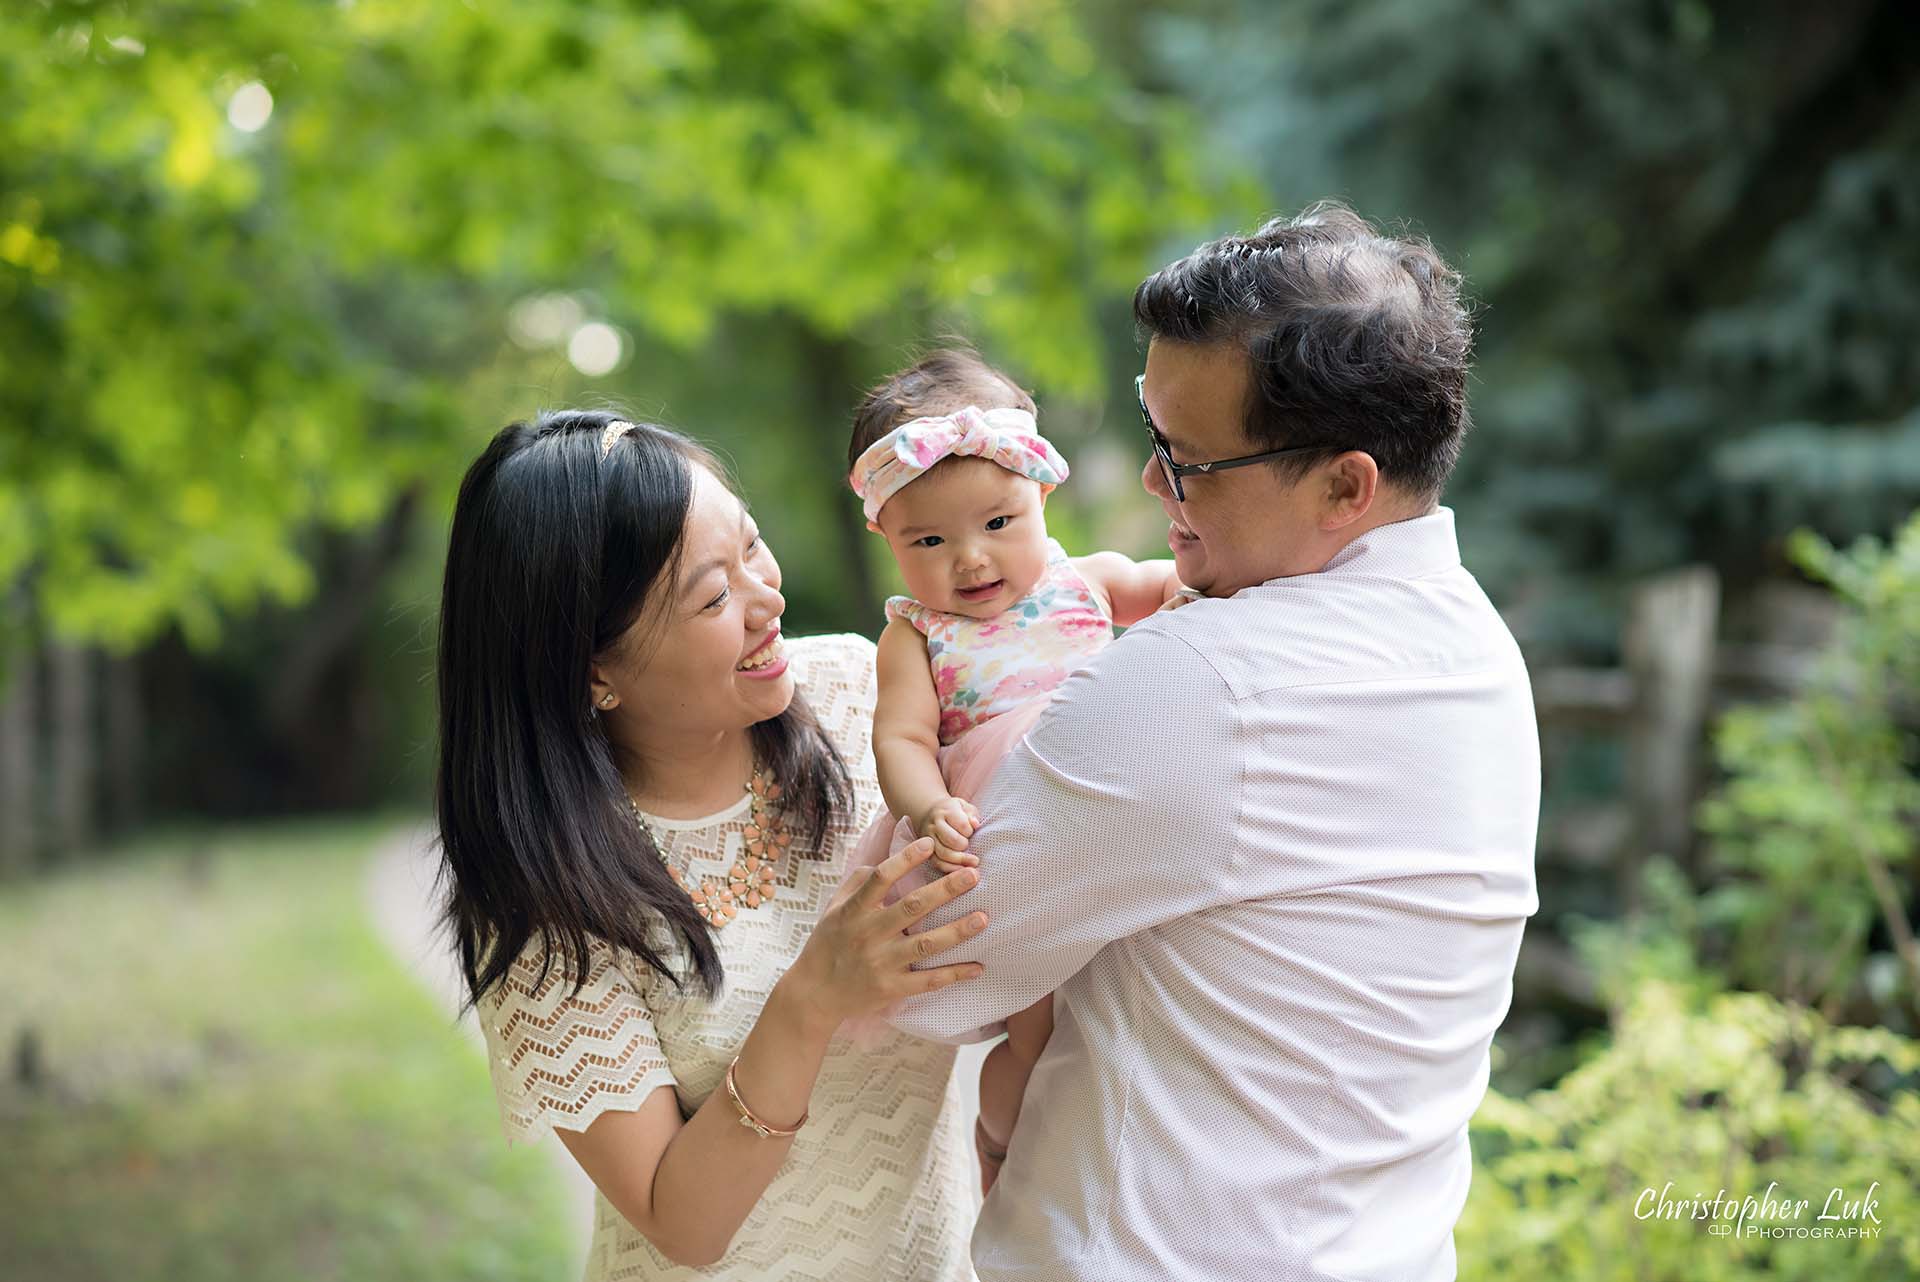 Christopher Luk Toronto Markham Family Children Photographer Candid Photojournalistic Candid Father Dad Baby Girl Daughter Adorable Cute Laugh Mom Mother Hug Smile small